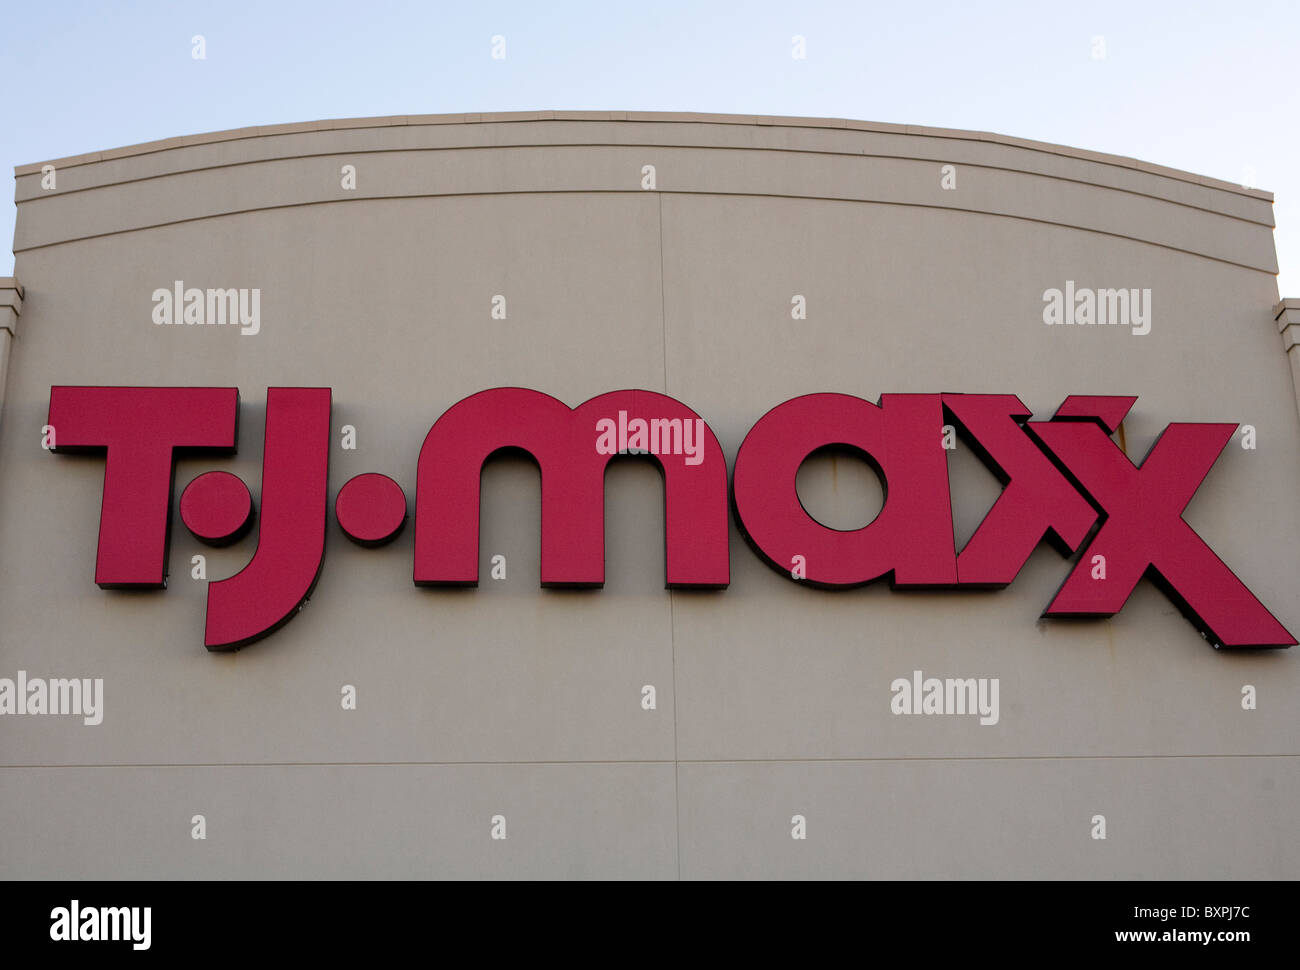 Tj maxx usa hi-res stock photography and images - Alamy